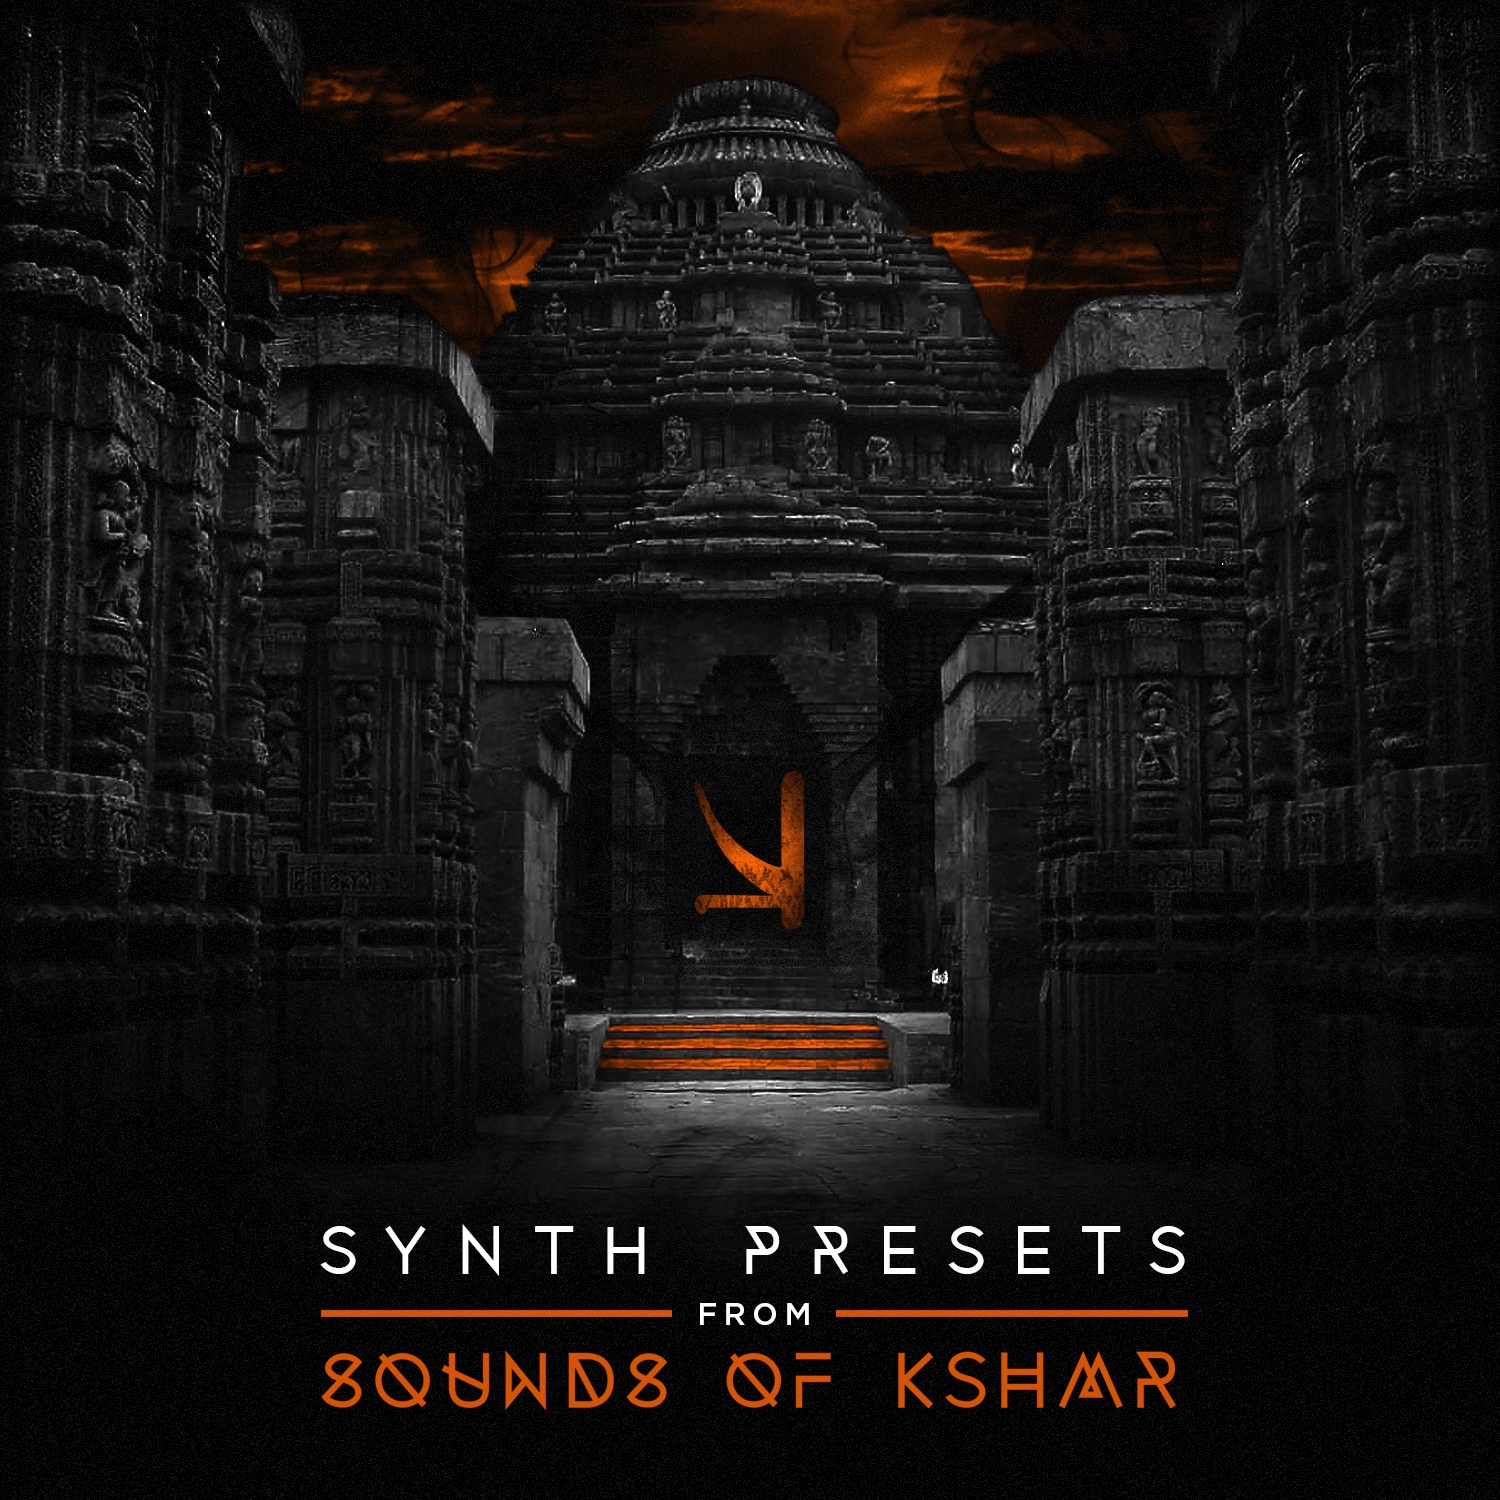 Synth Presets from Sounds of KSHMR